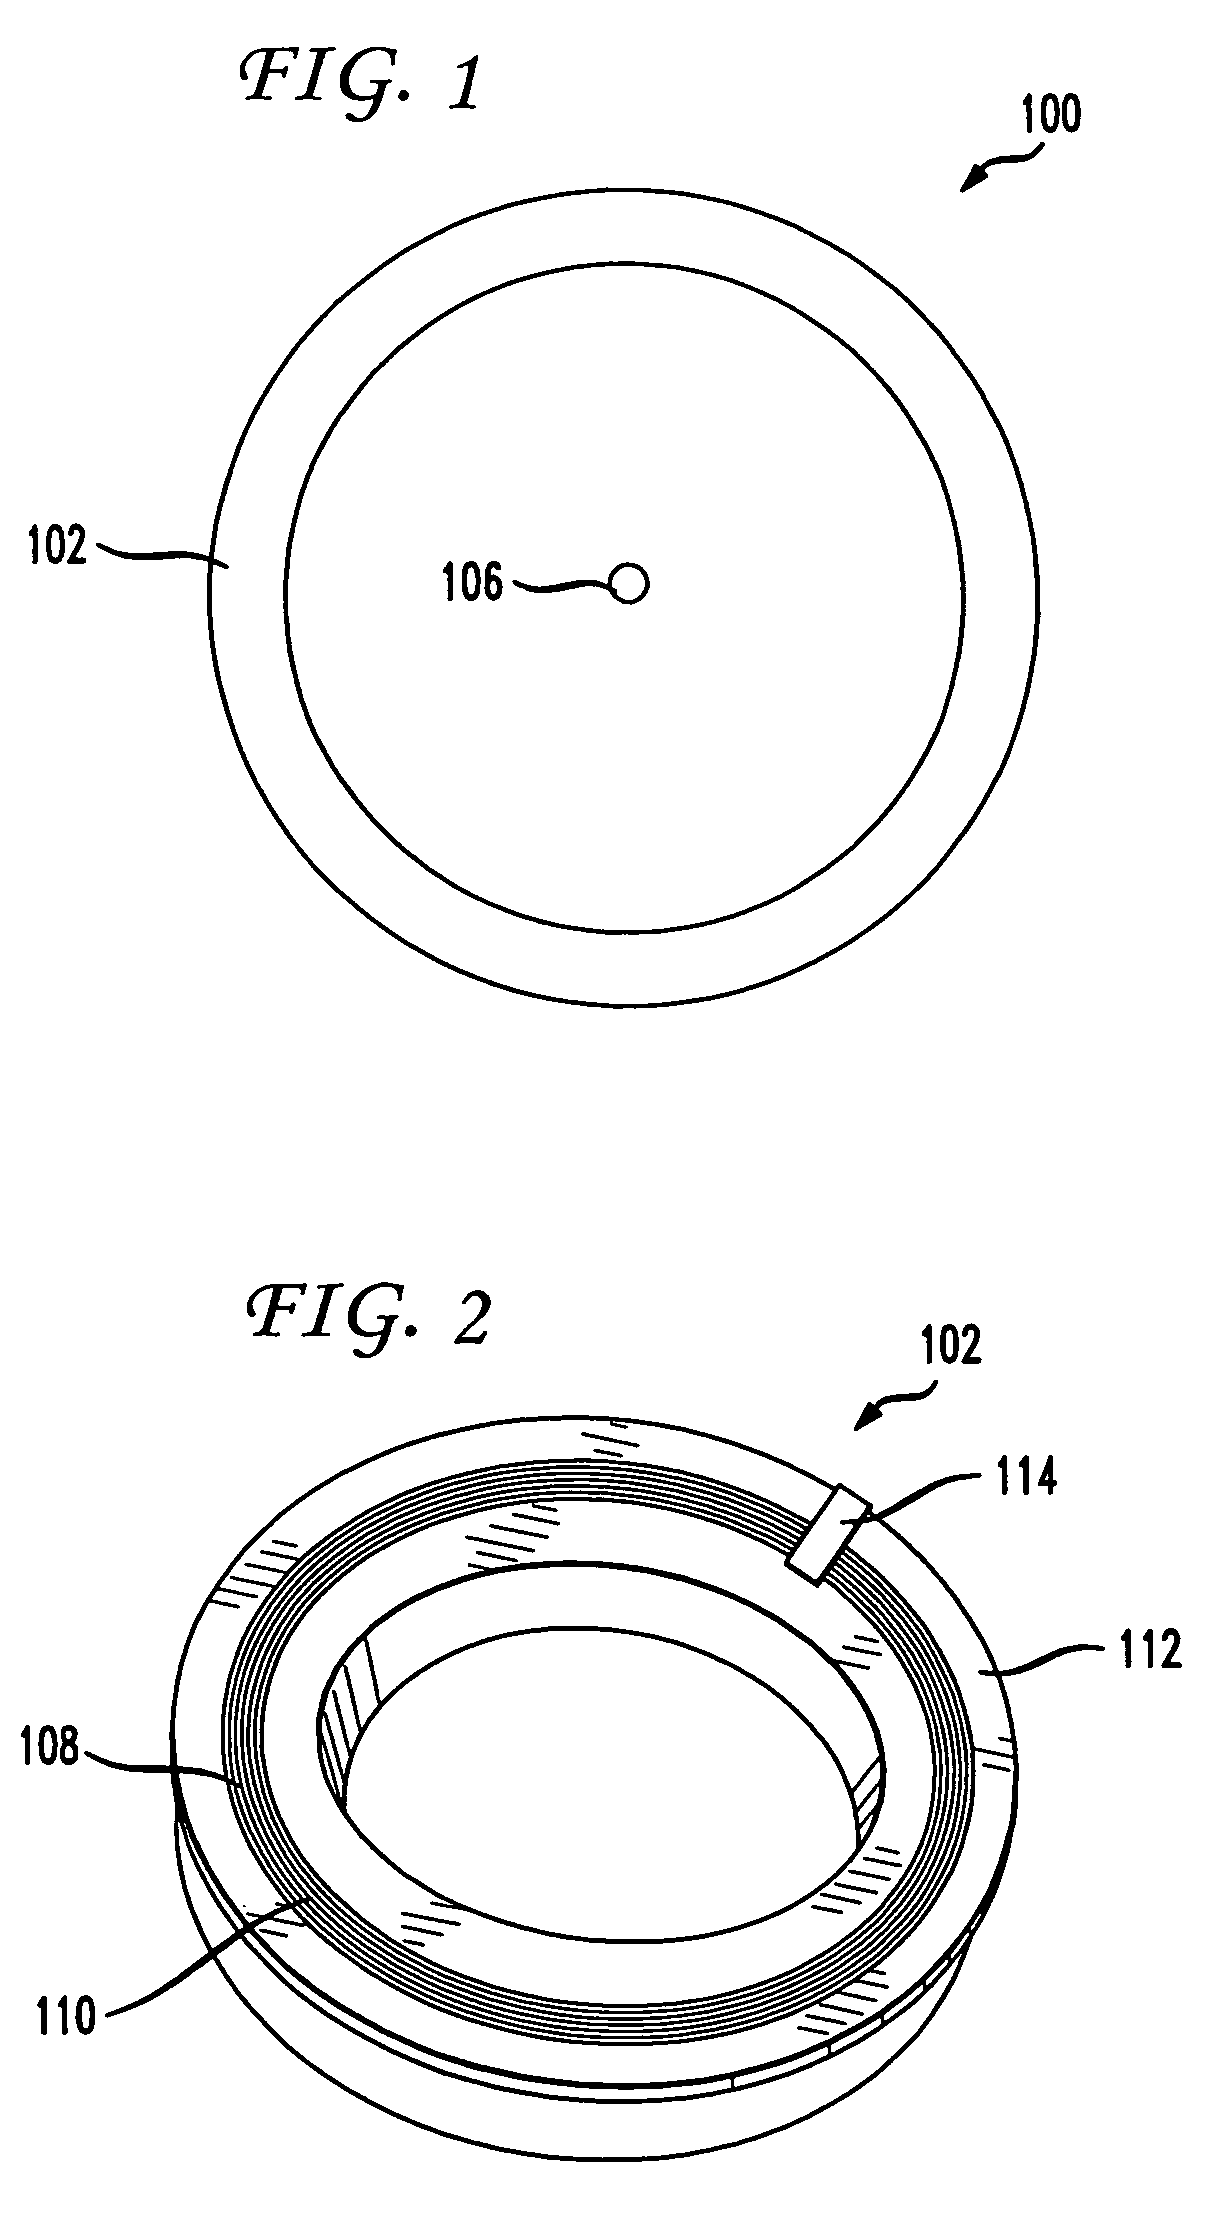 Transmission lines applied to contact free slip rings